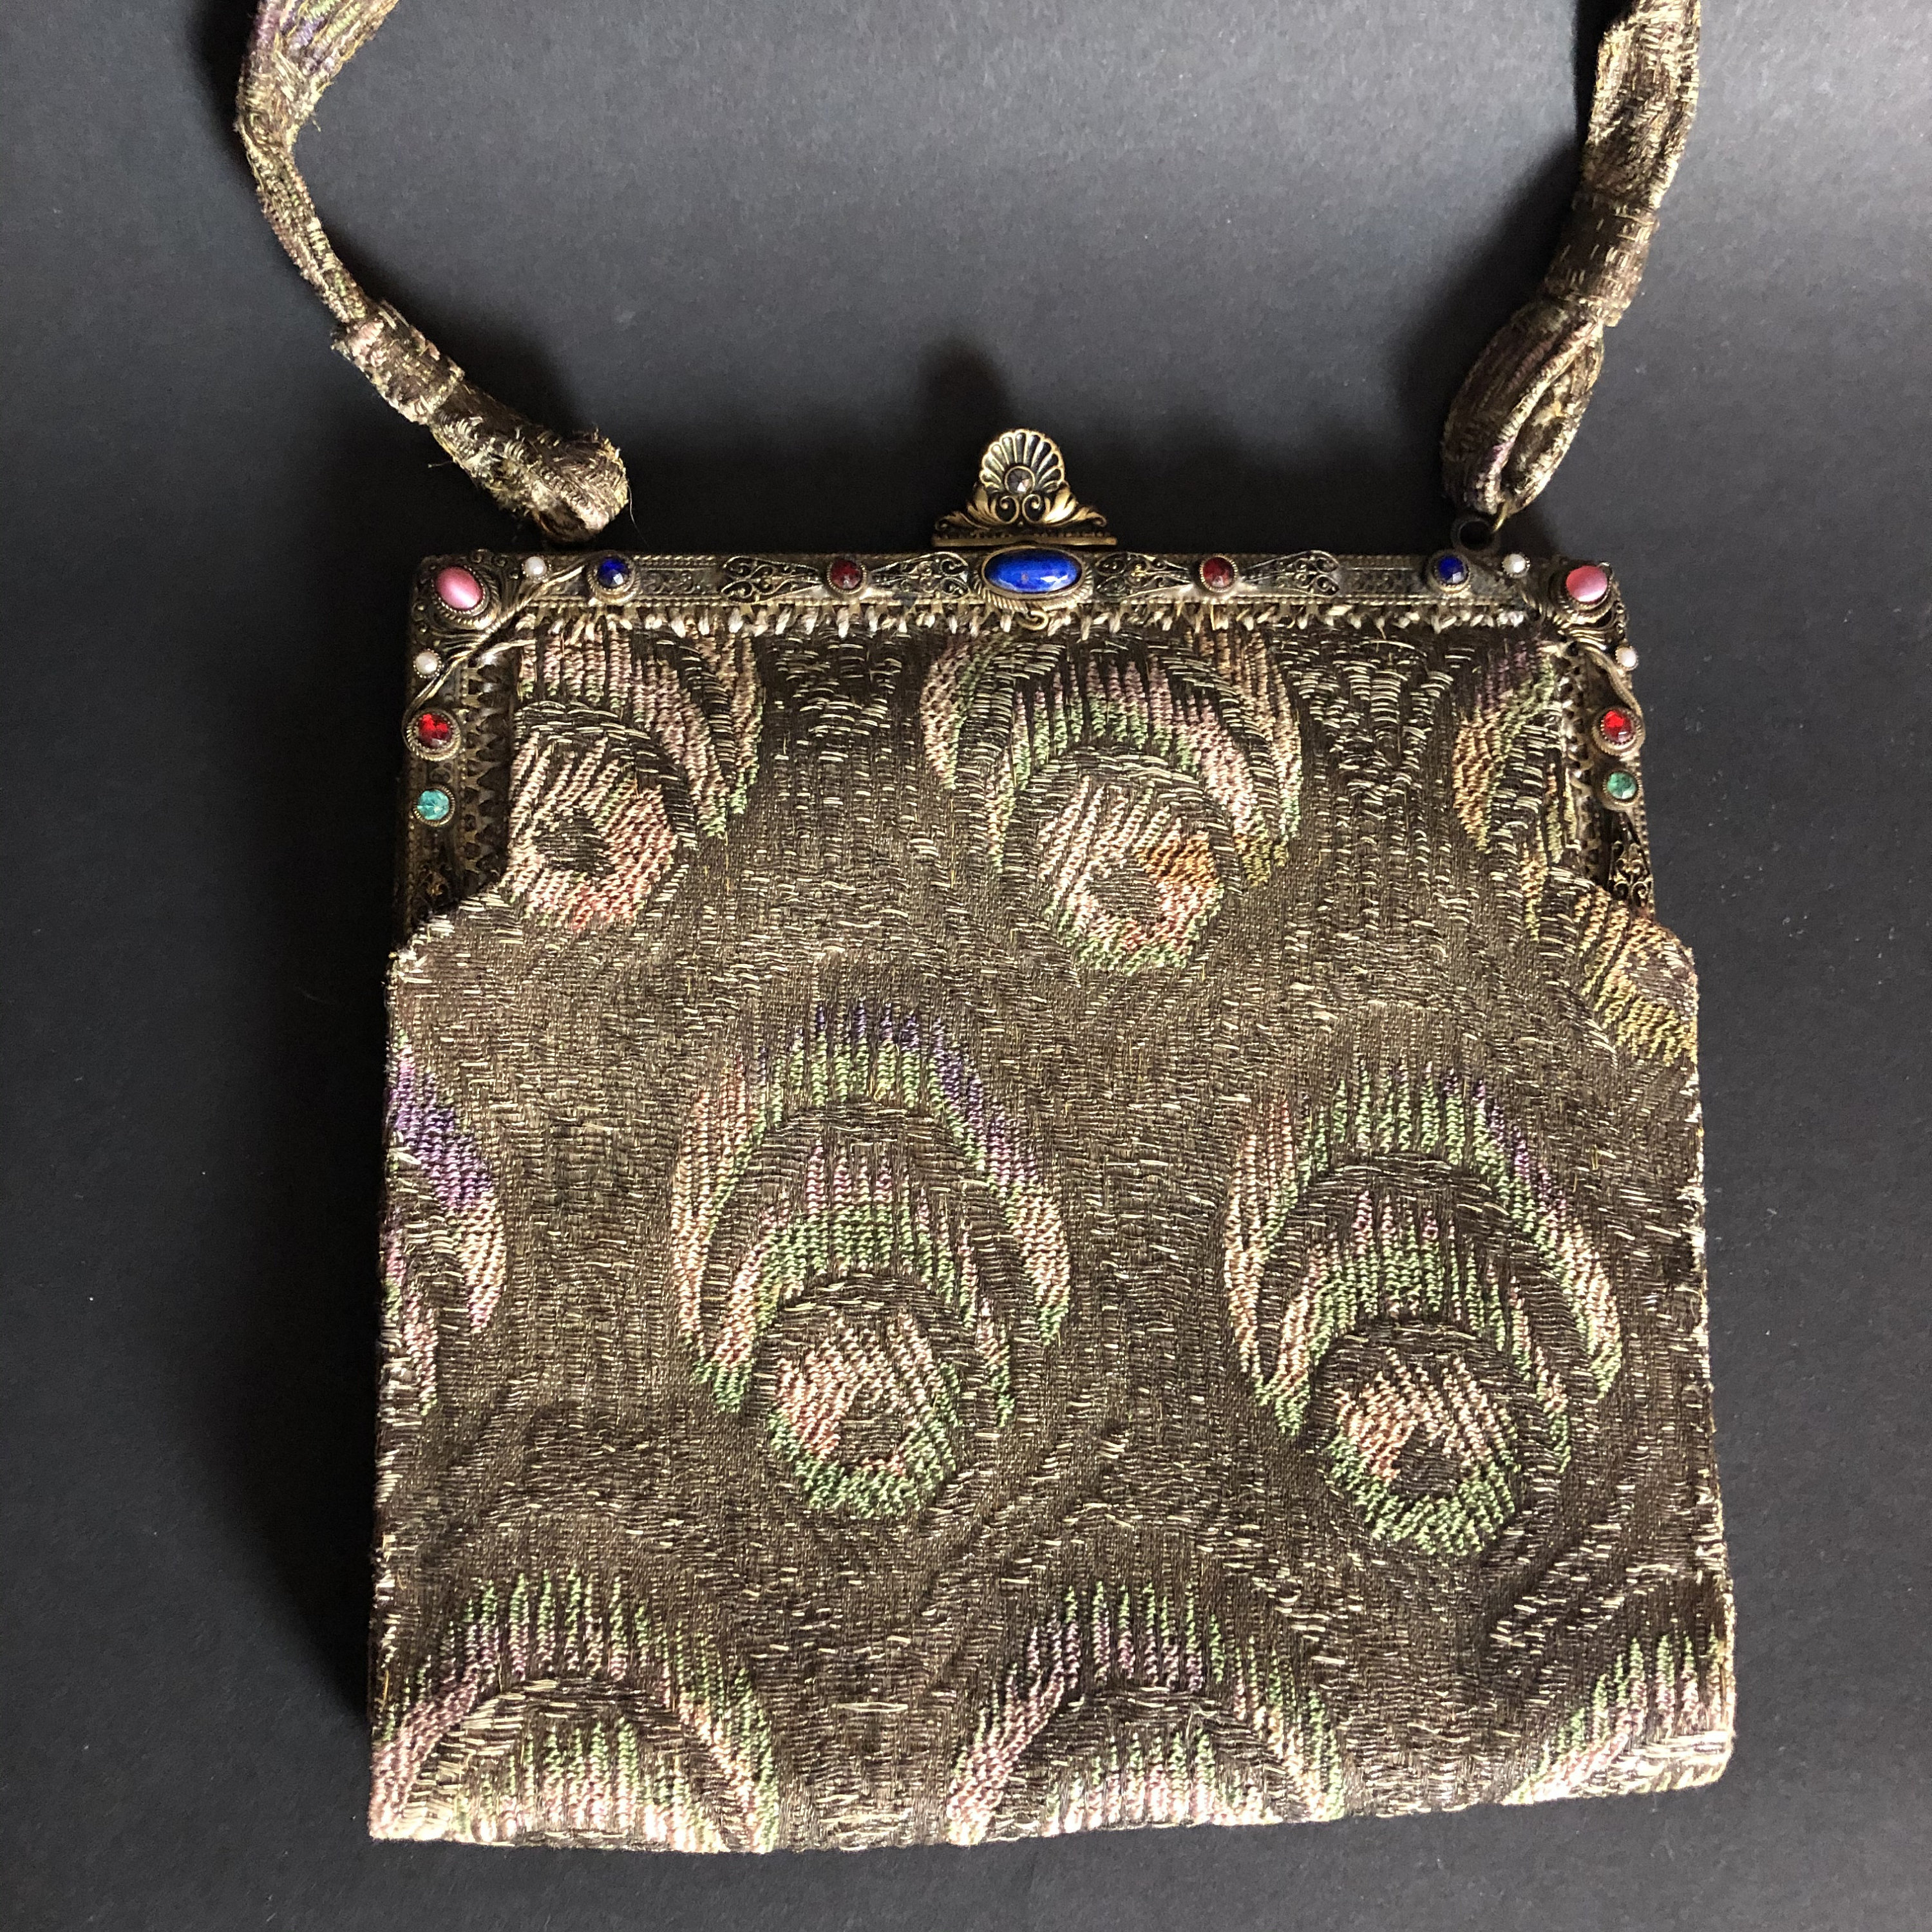 Vintage 1950s Bronze Color Glass Beaded Purse with Rhinestone Decorated  Frame - Mint Condition Evening Bag